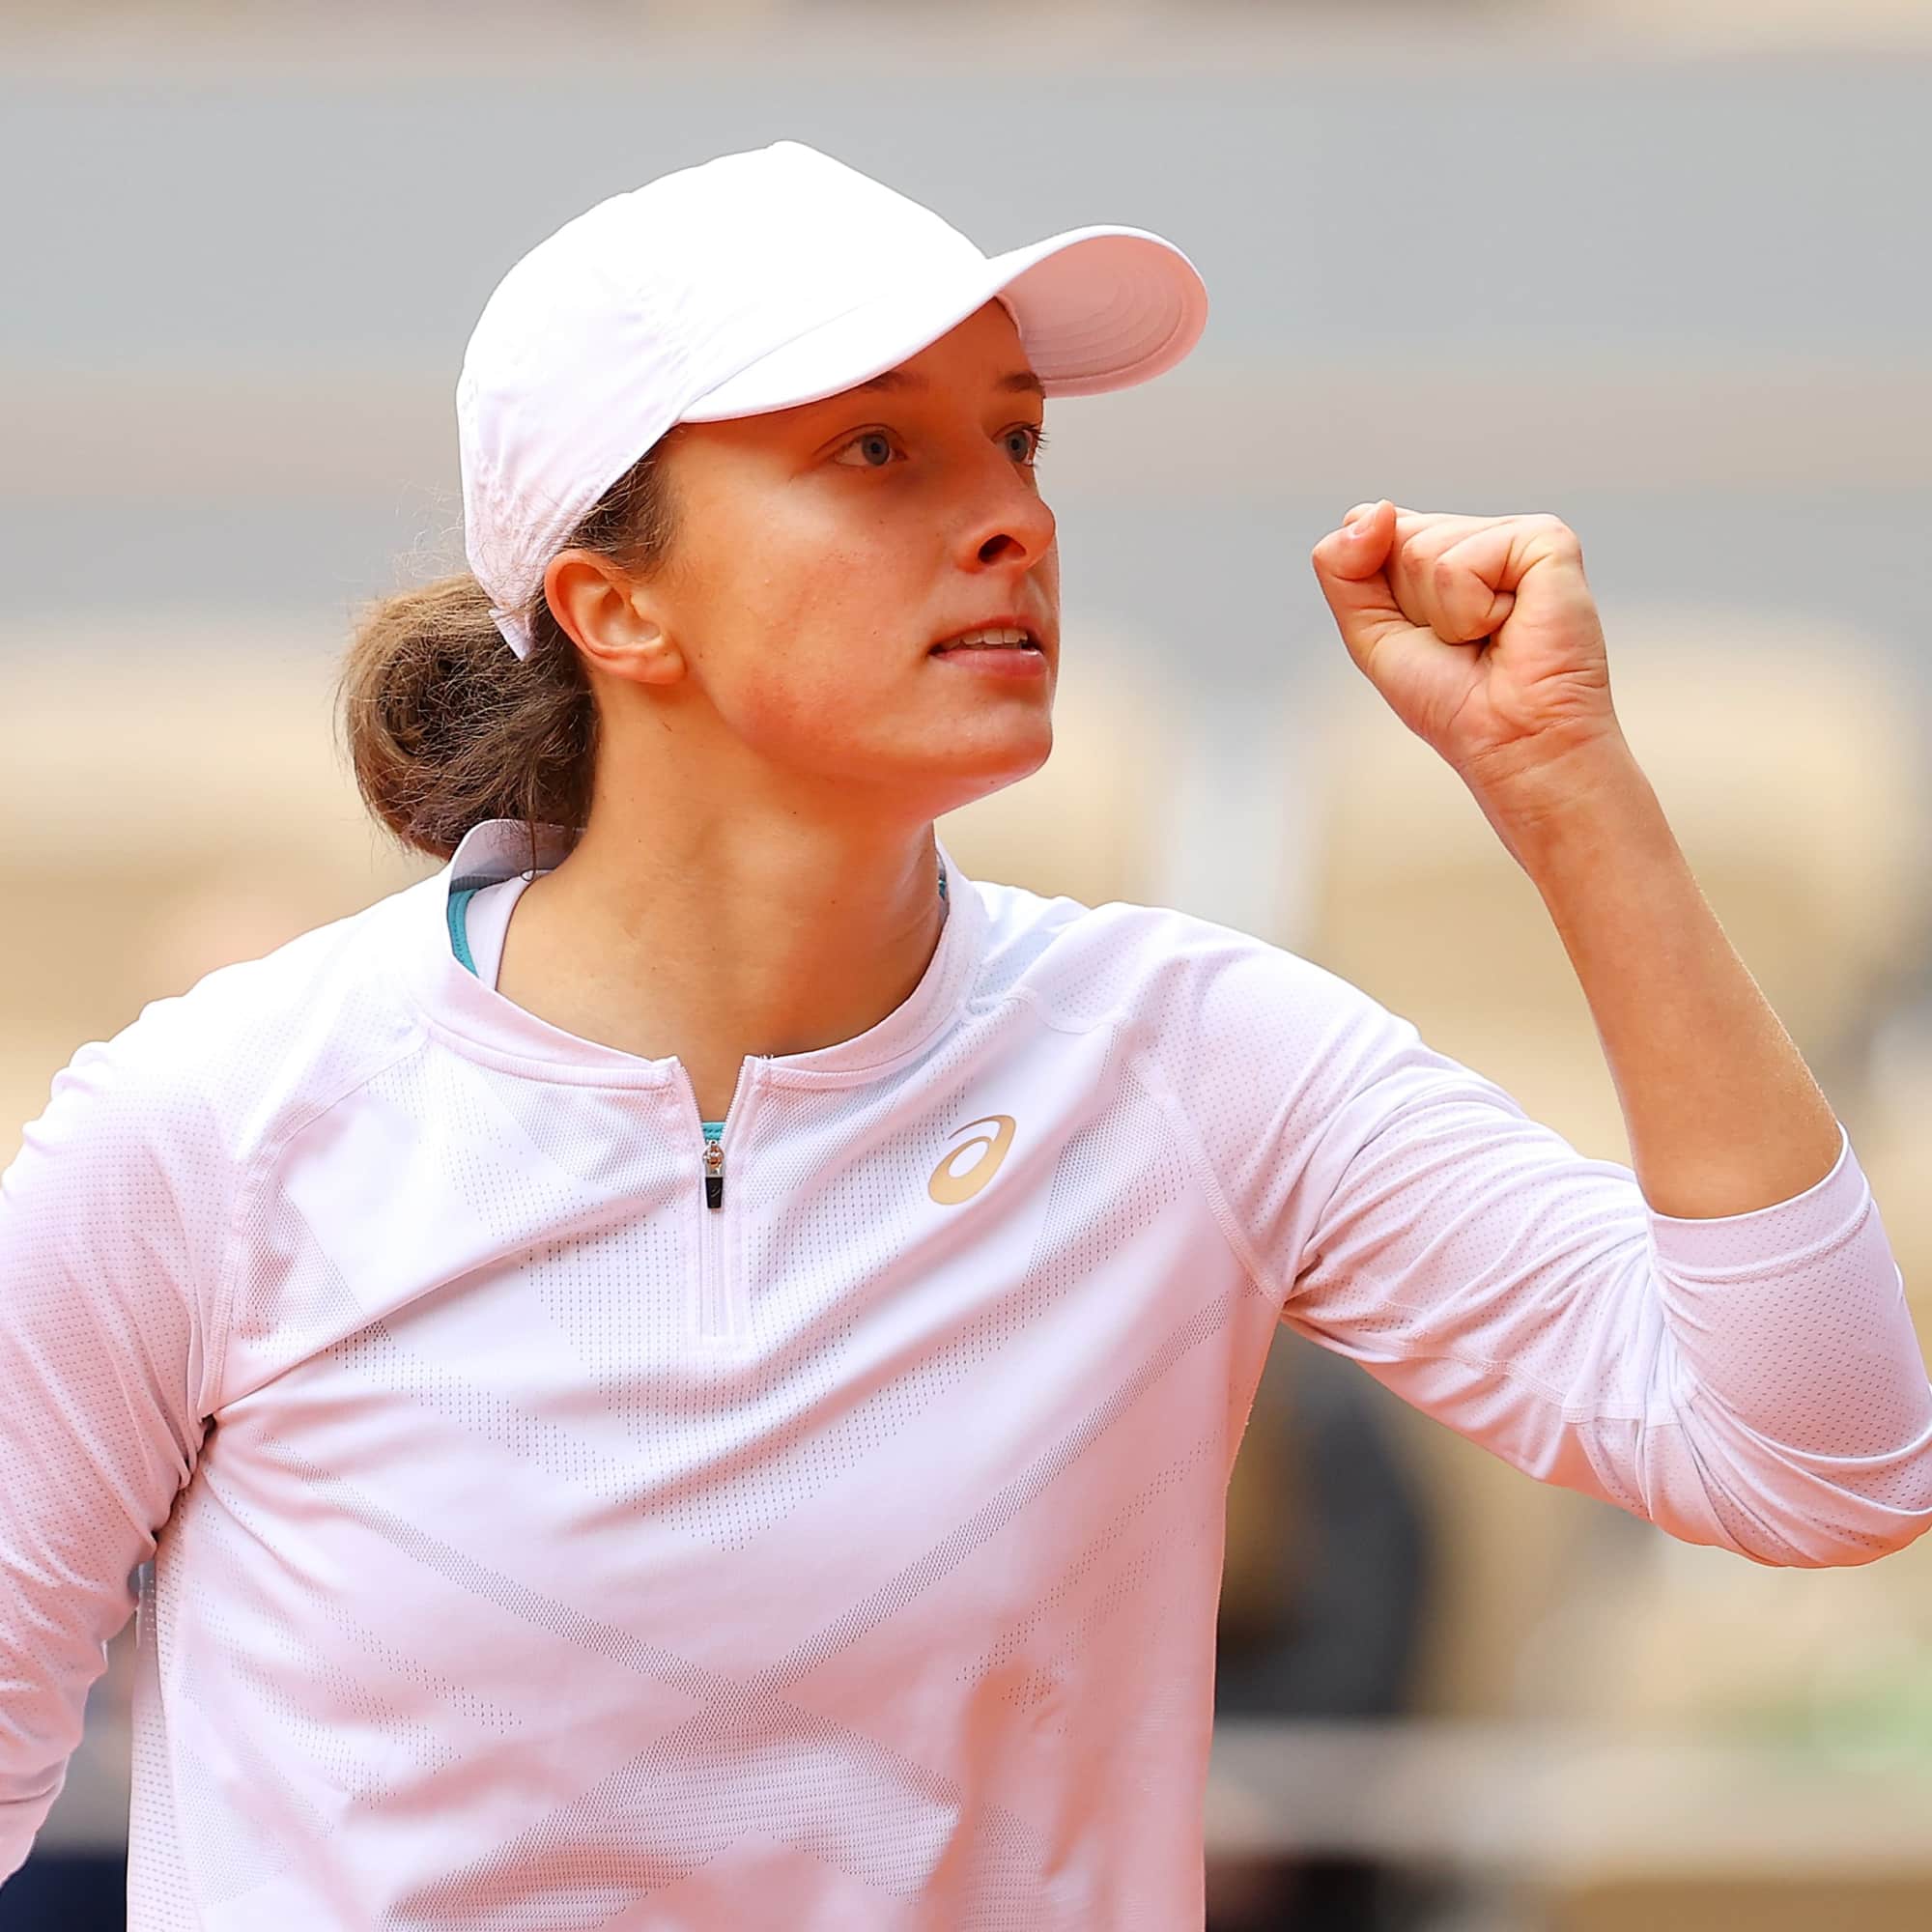 Meet Iga Swiatek, the 19-Year-Old Tennis Player Who Won the 2020 French Open